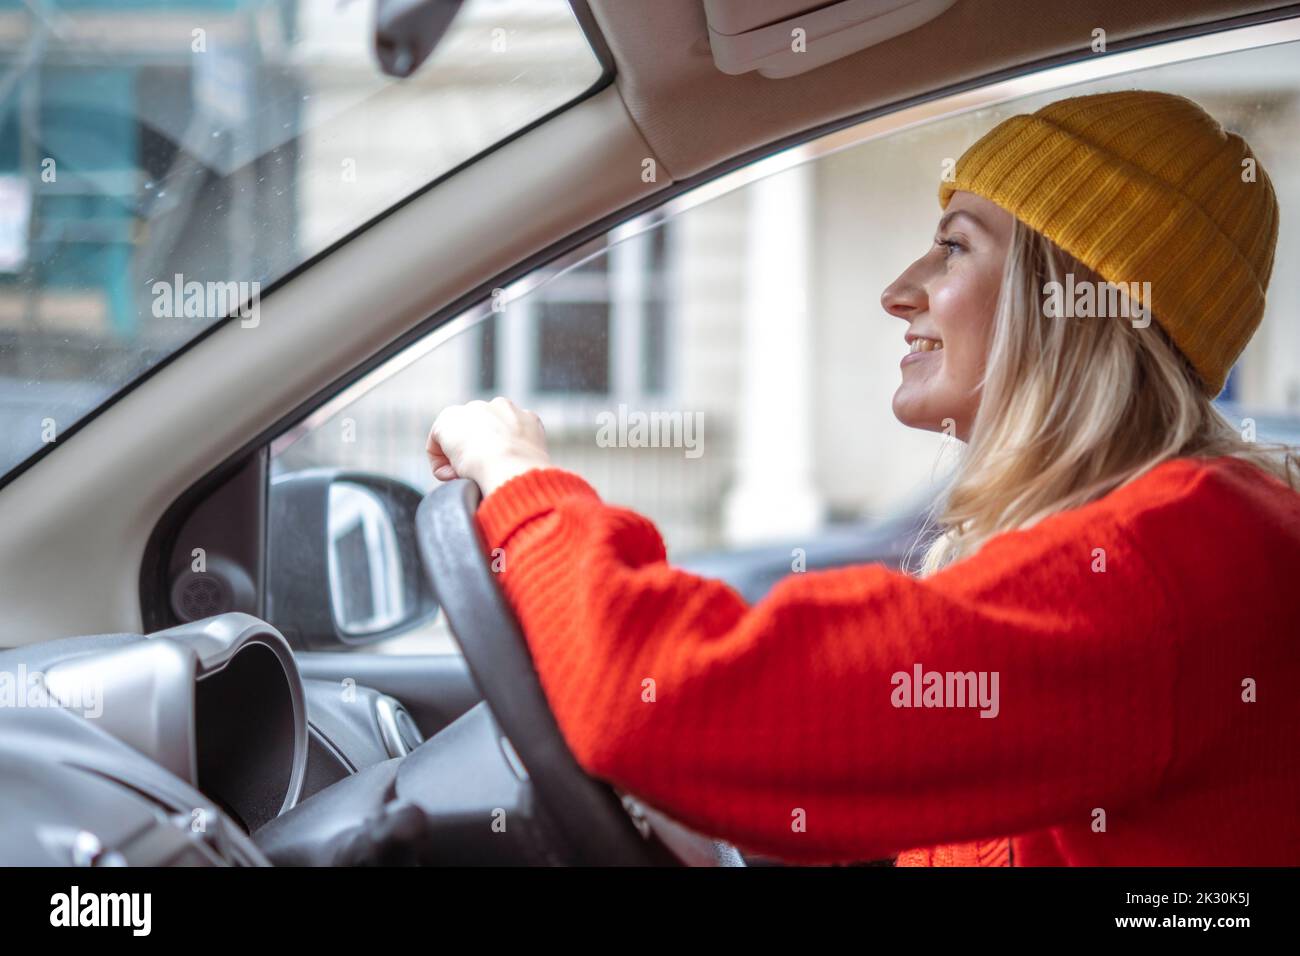 Smiling woman in knit hat driving car Stock Photo